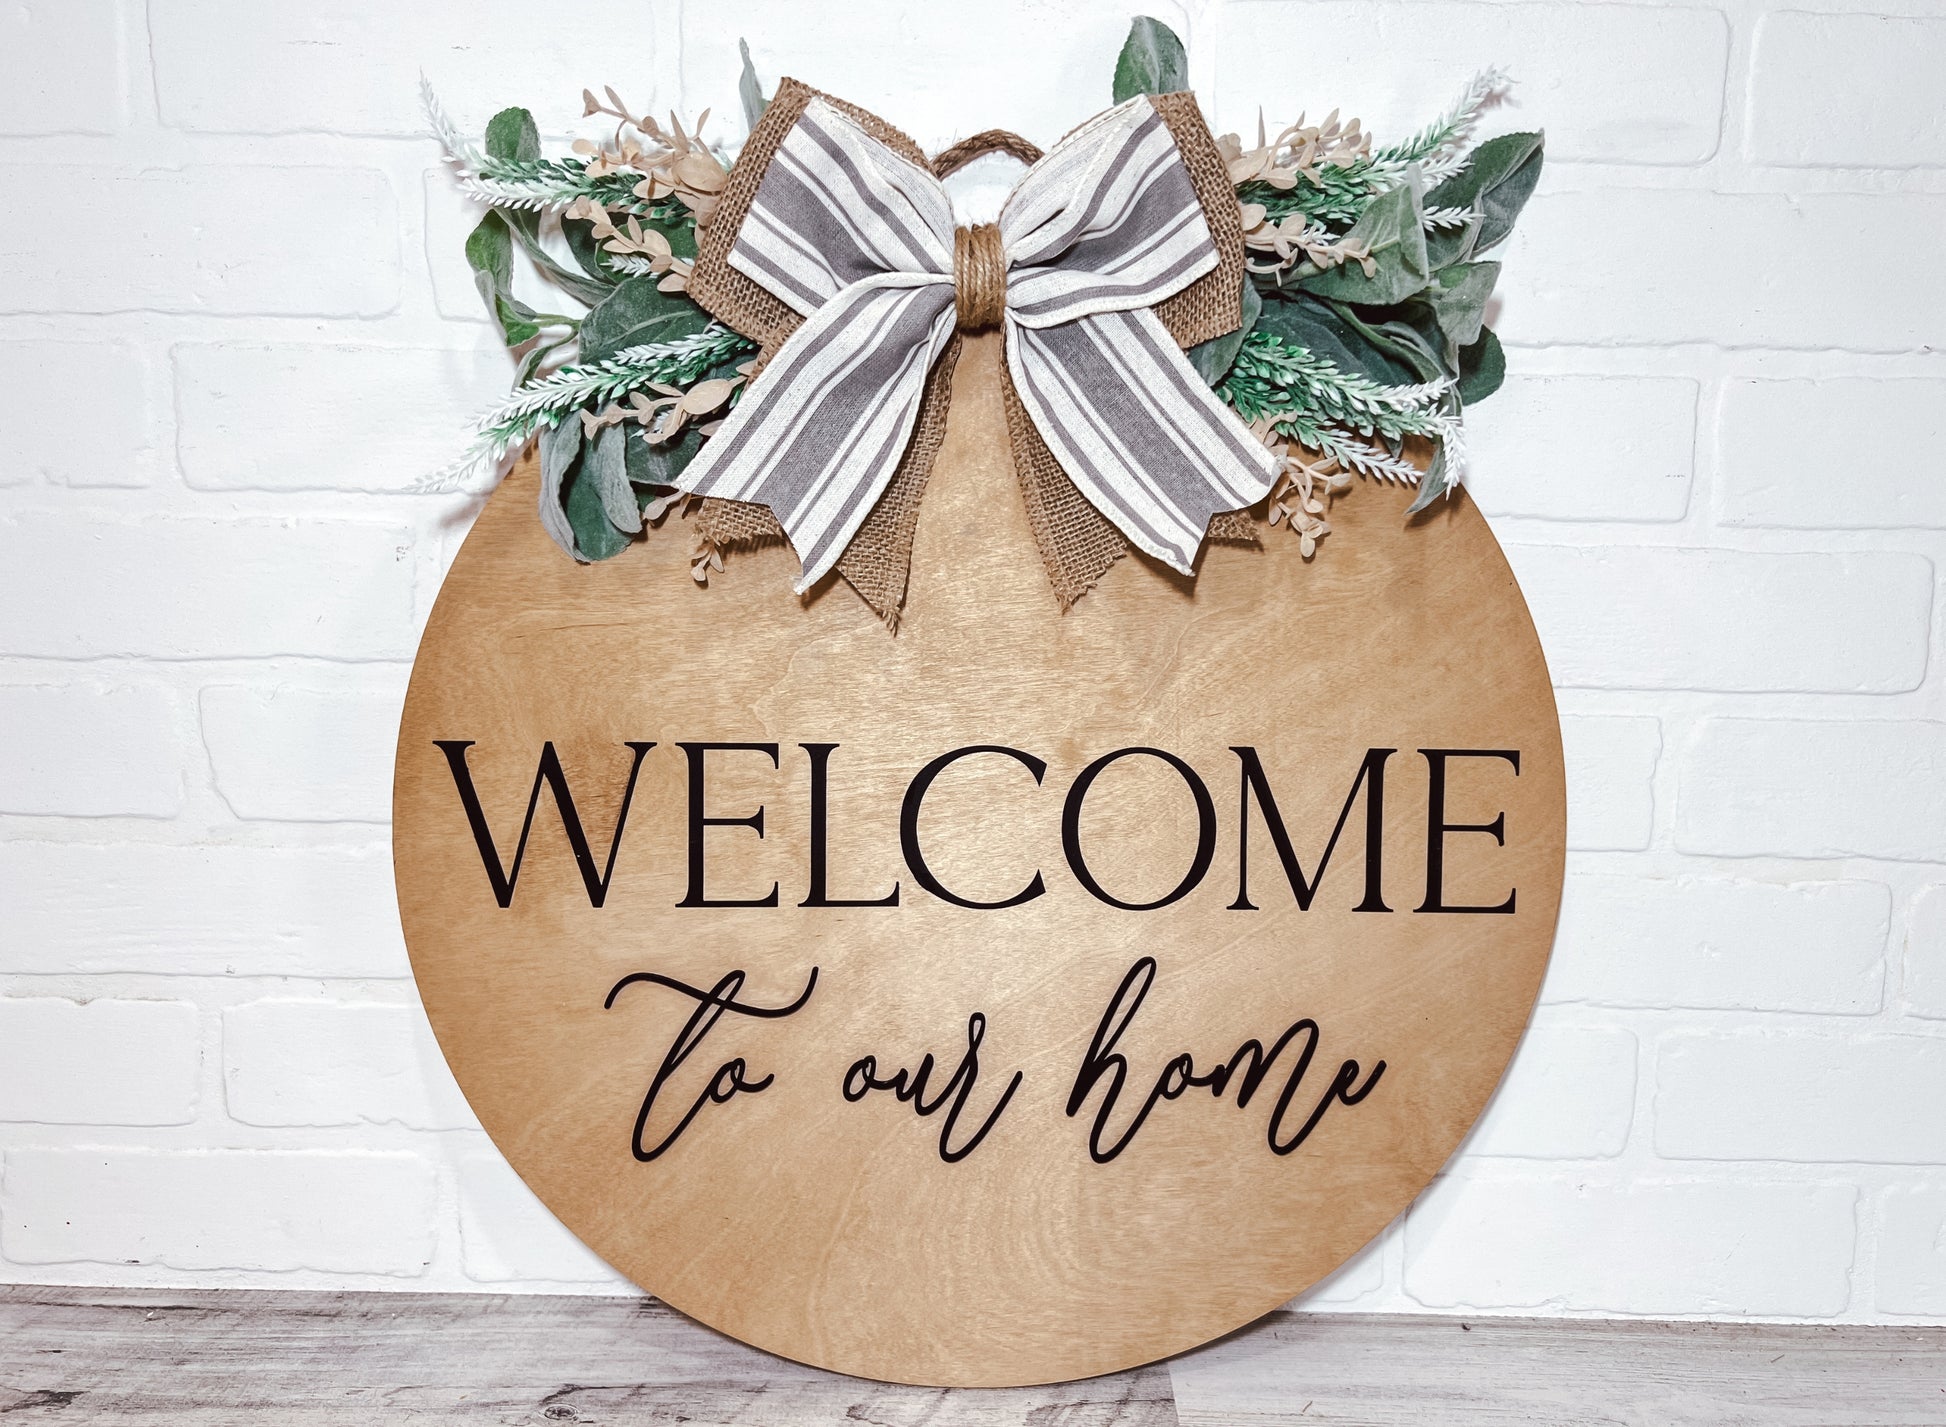 Welcome to our Home Door Hanger - B-Cozy Home Decor